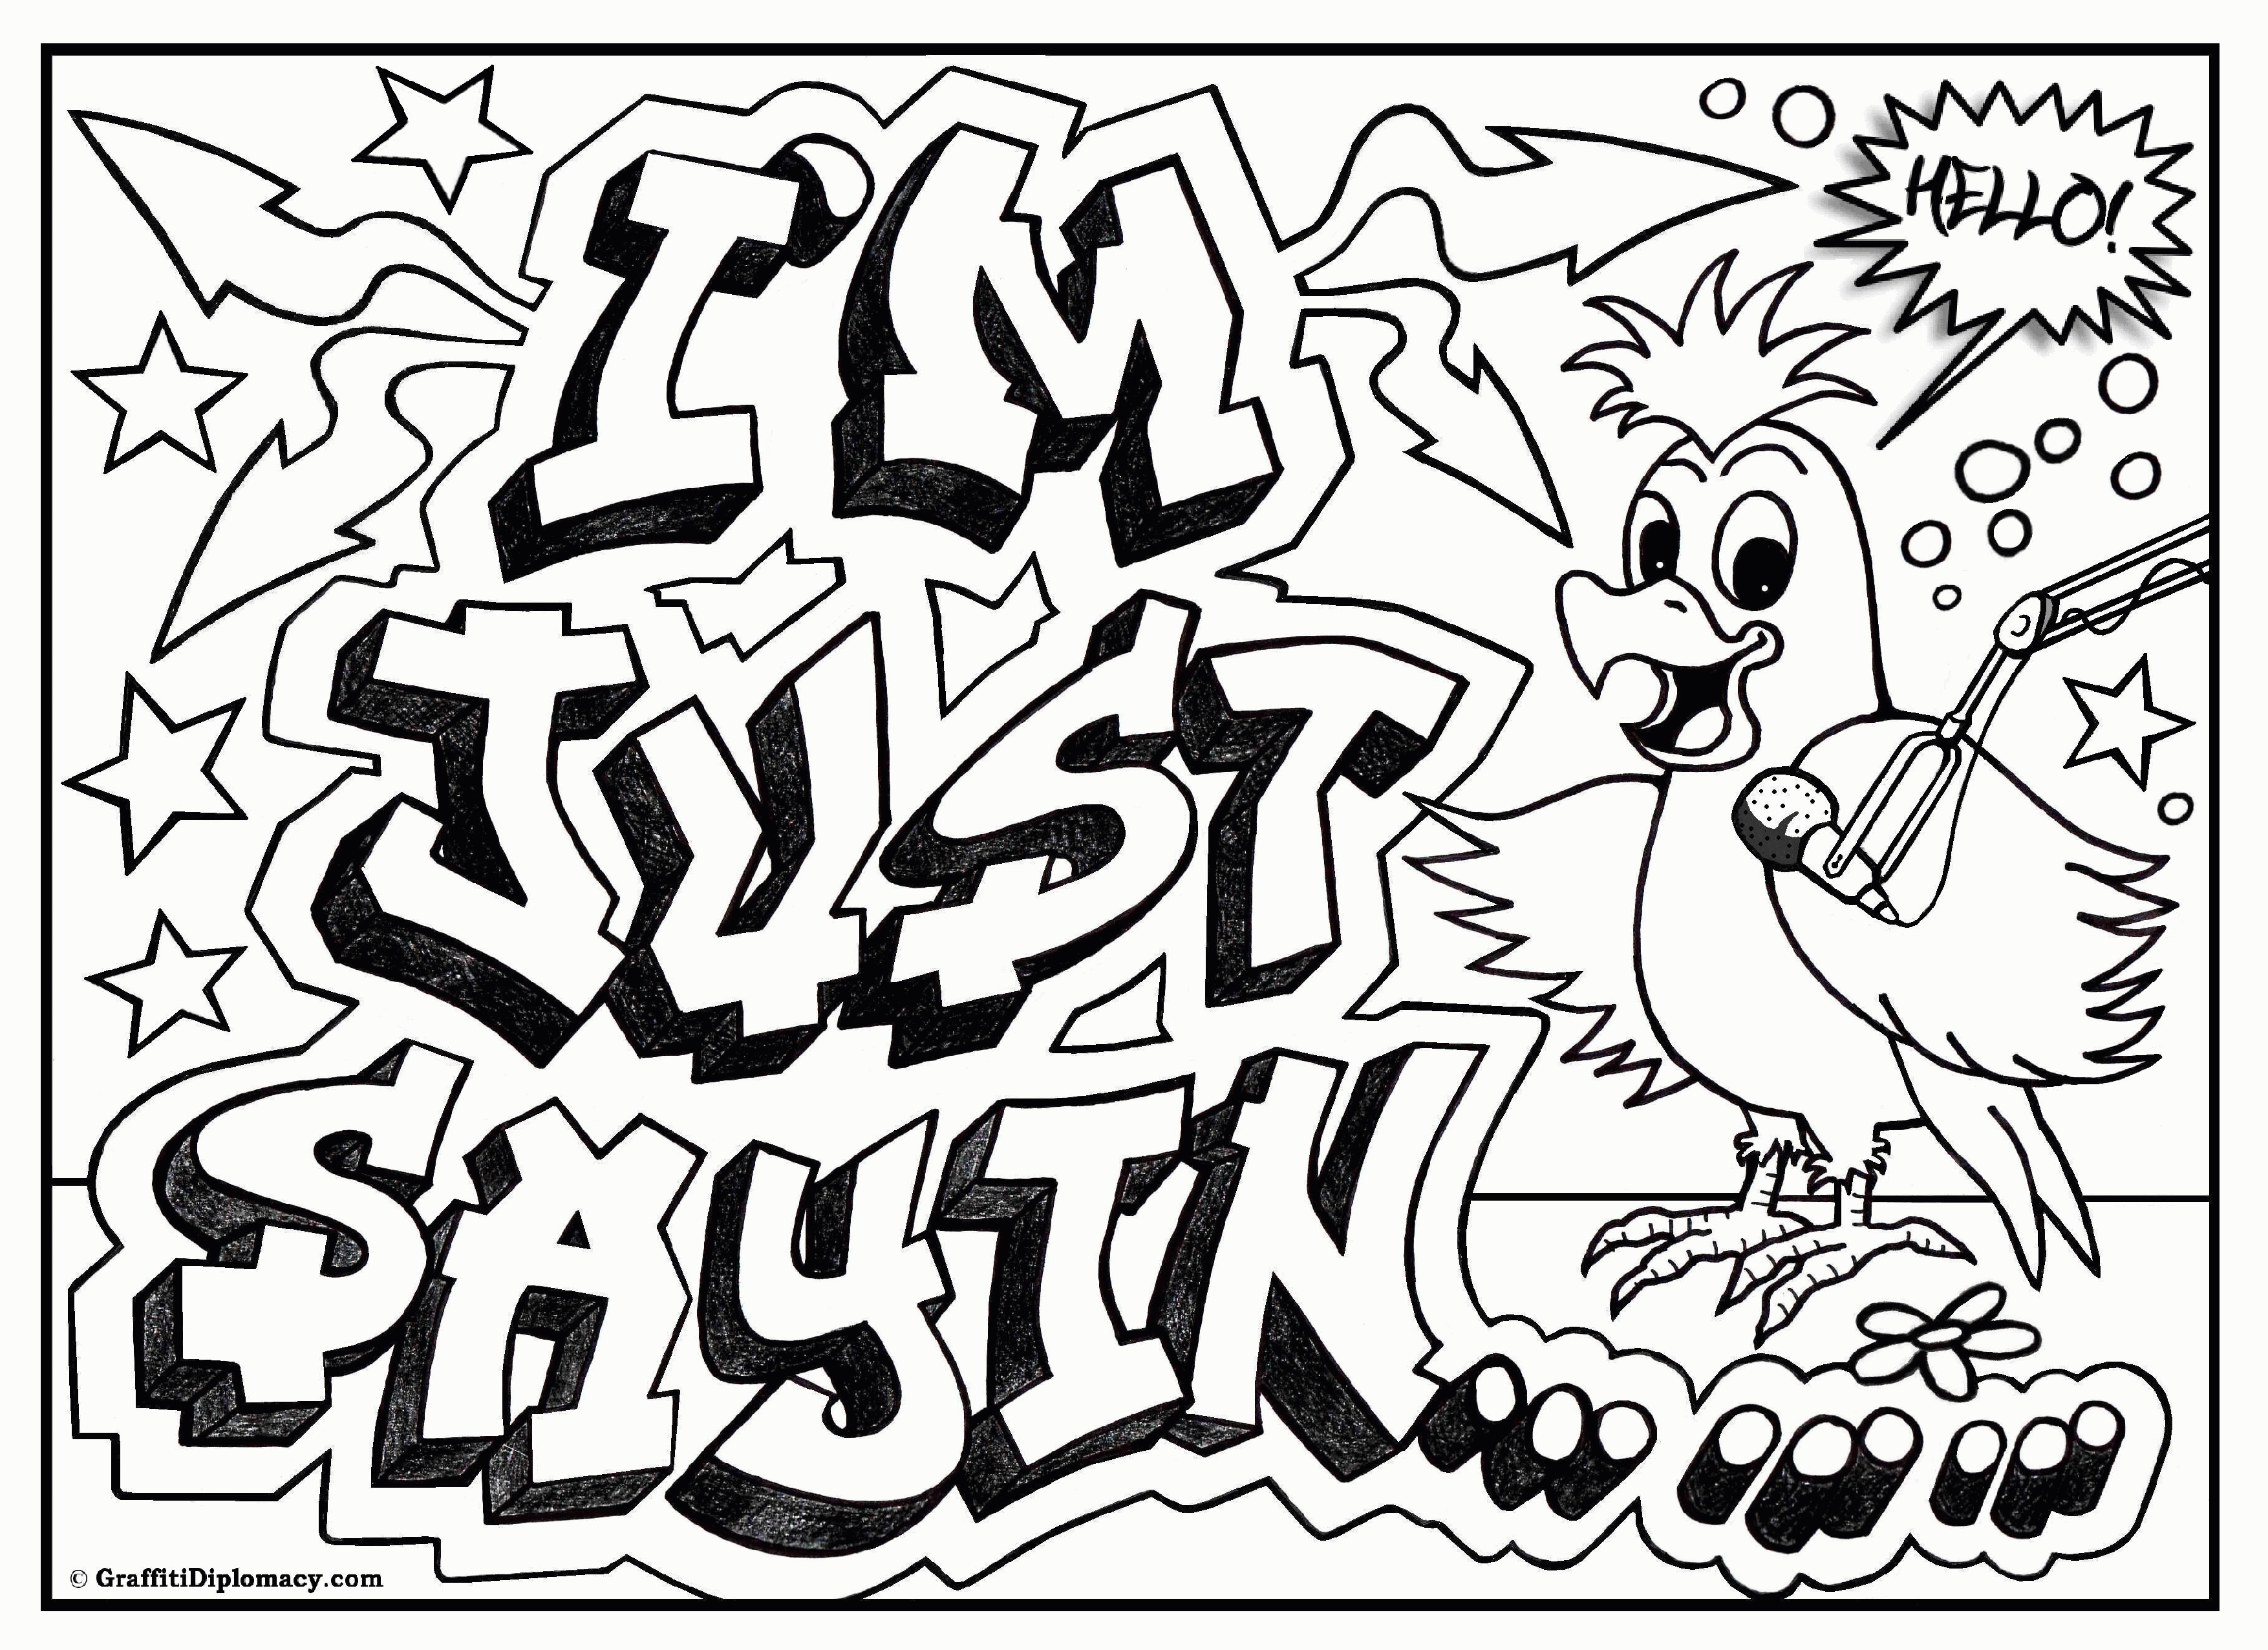 Free Coloring Pages For Teenagers Graffiti Download Free Coloring 